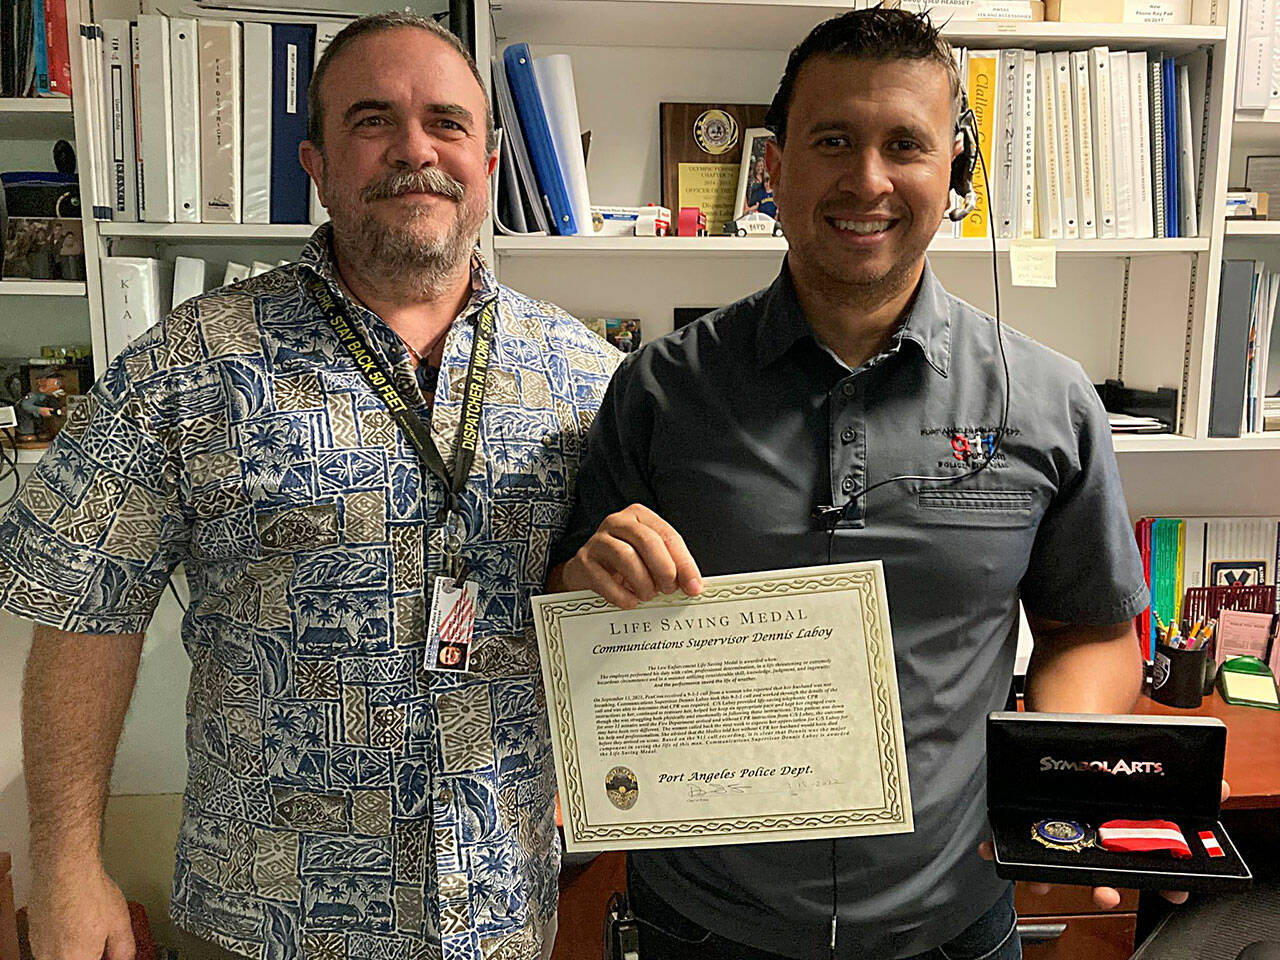 The Port Angeles Police Department, represented by PenCom deputy director Karl Hatton, left, honored Dennis Laboy, a communications supervisor from Sequim. (City of Port Angeles)